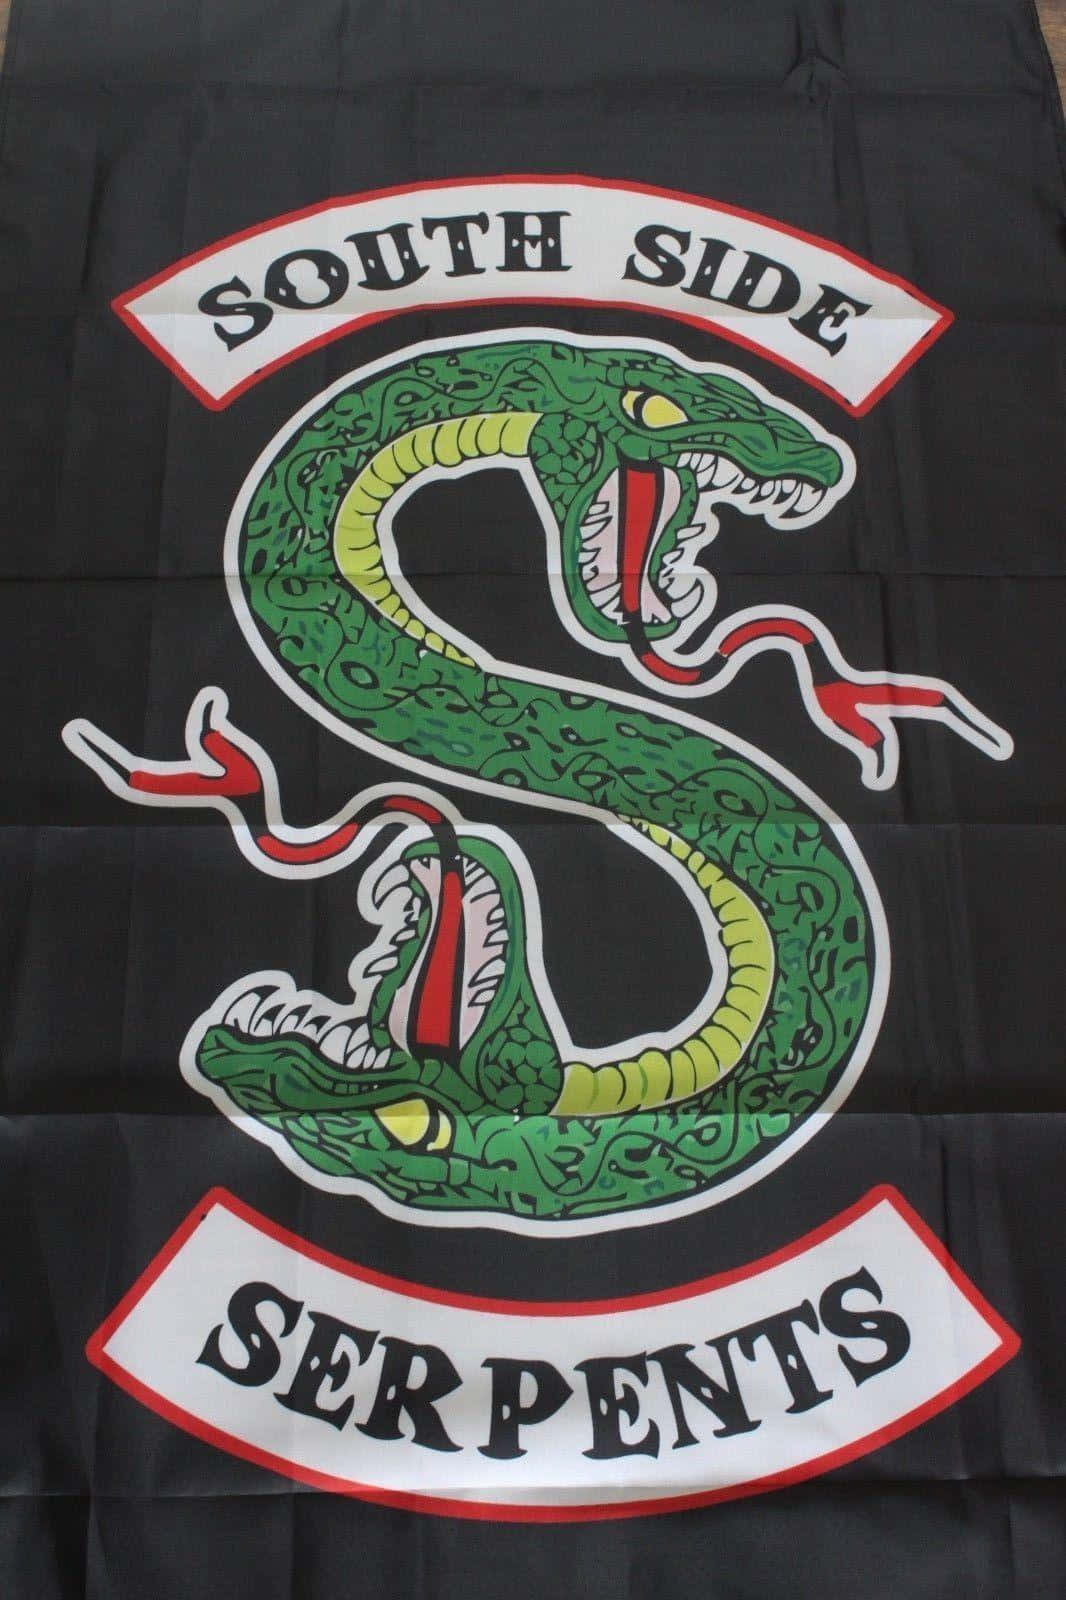 Represent the Southside Serpents with pride Wallpaper